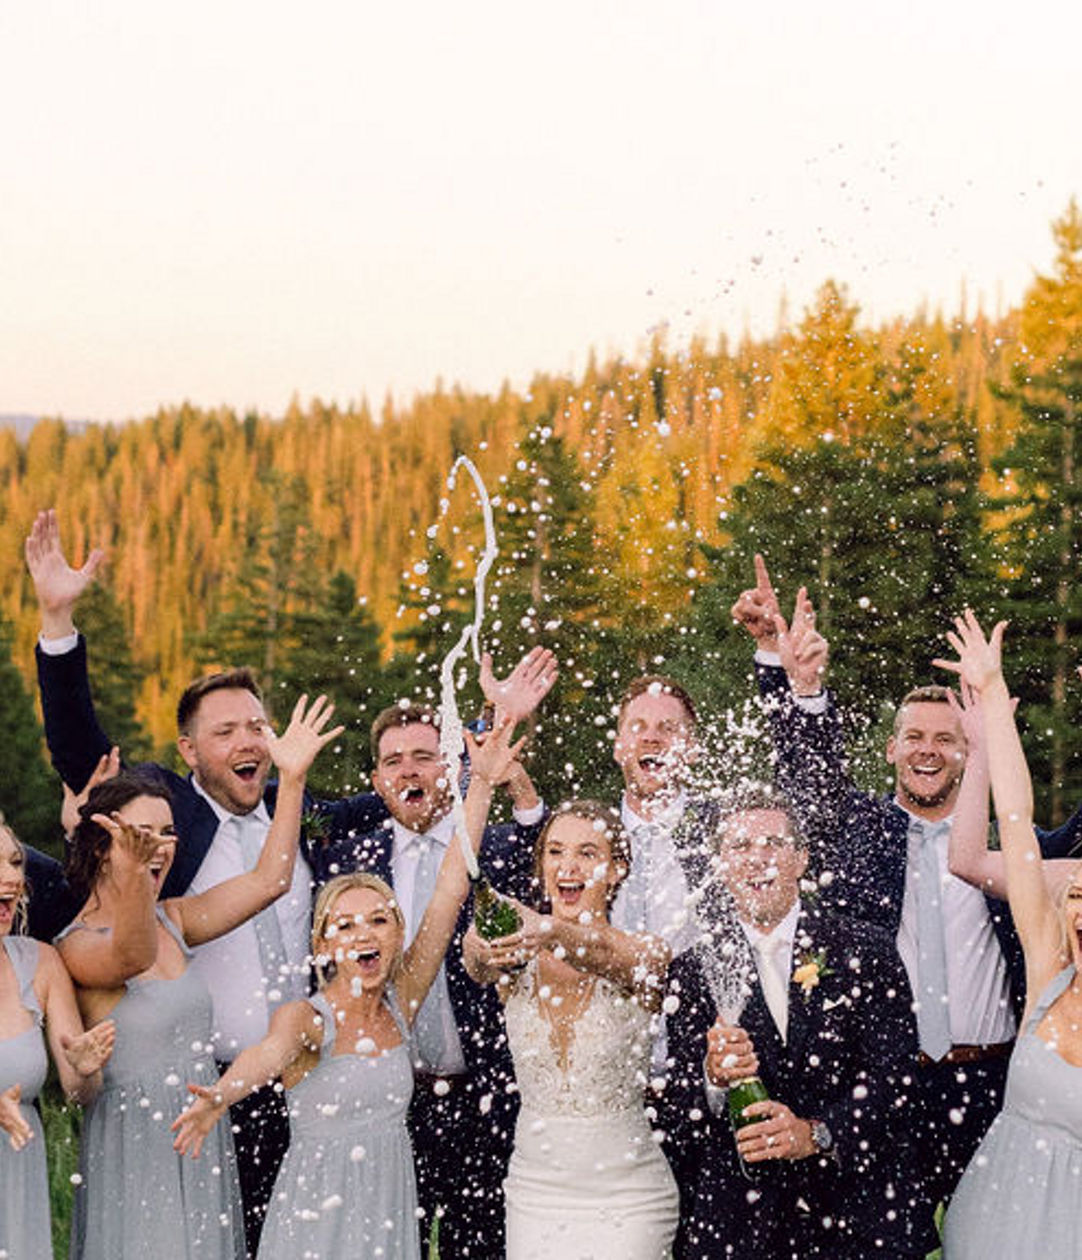 20 Tips for Throwing the Ultimate Spring Wedding